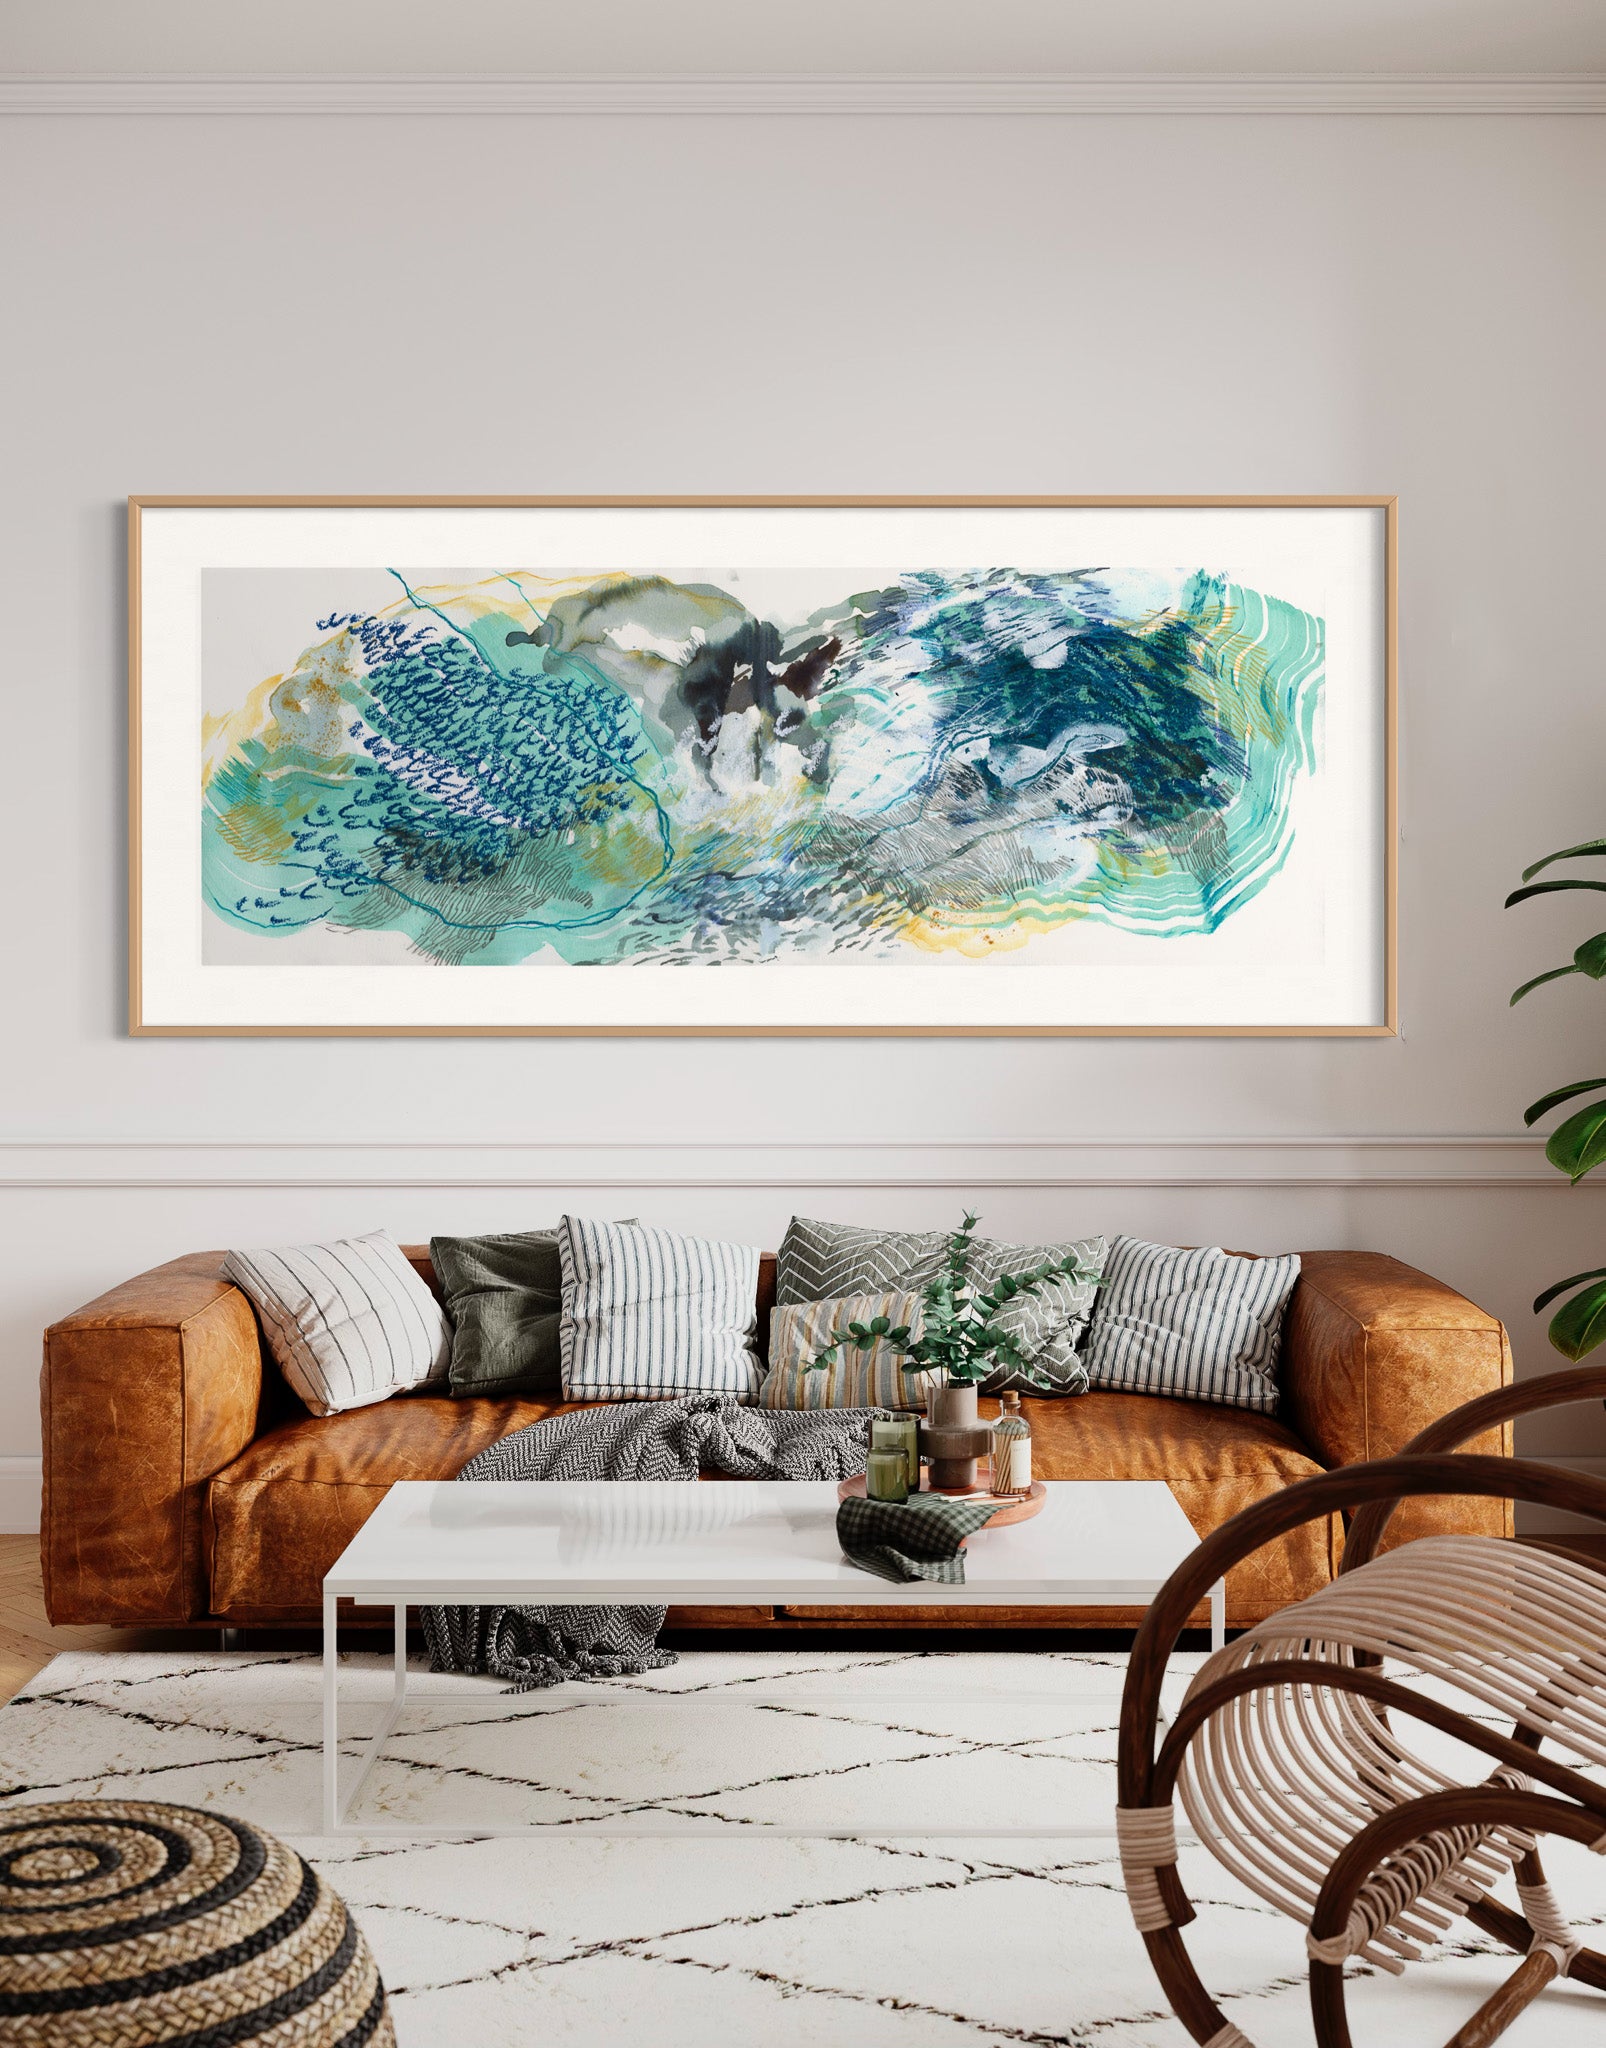 Ocean Sway Limited Edition Fine art print in living room 